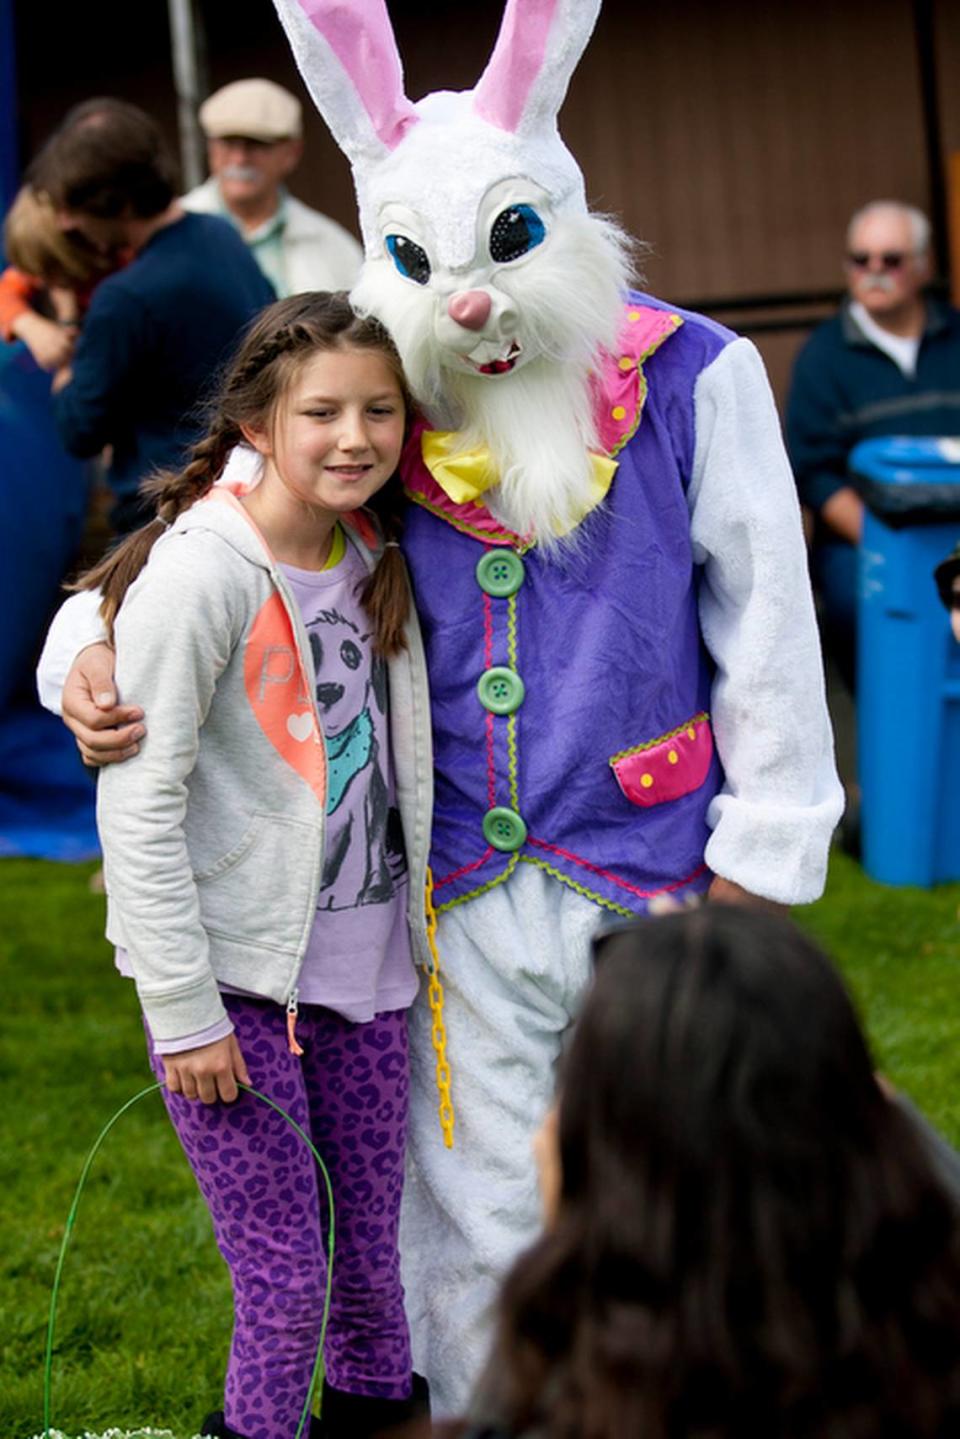 Julie Bundy of Dana Point, takes a photo of her daughter, Haley, 9 with the Easter Bunny at the South Bay Community Center in Los Osos in 2013. Egg hunts are scheduled across San Luis Obispo County in April 2023.